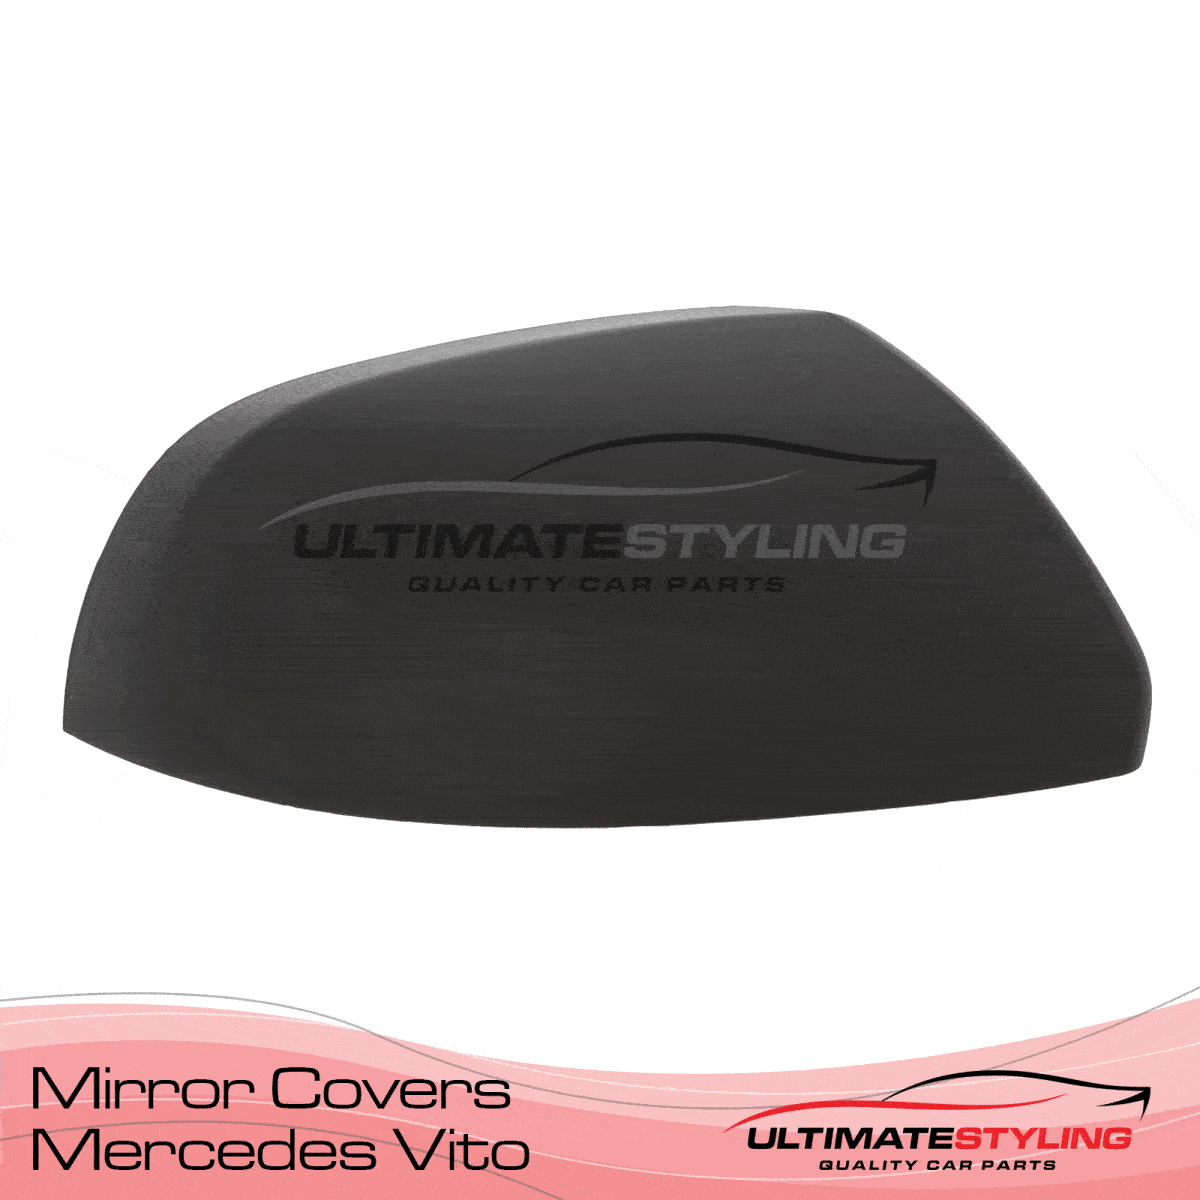 Mercedes Benz Vito Wing Mirror Covers - Ultimate Styling